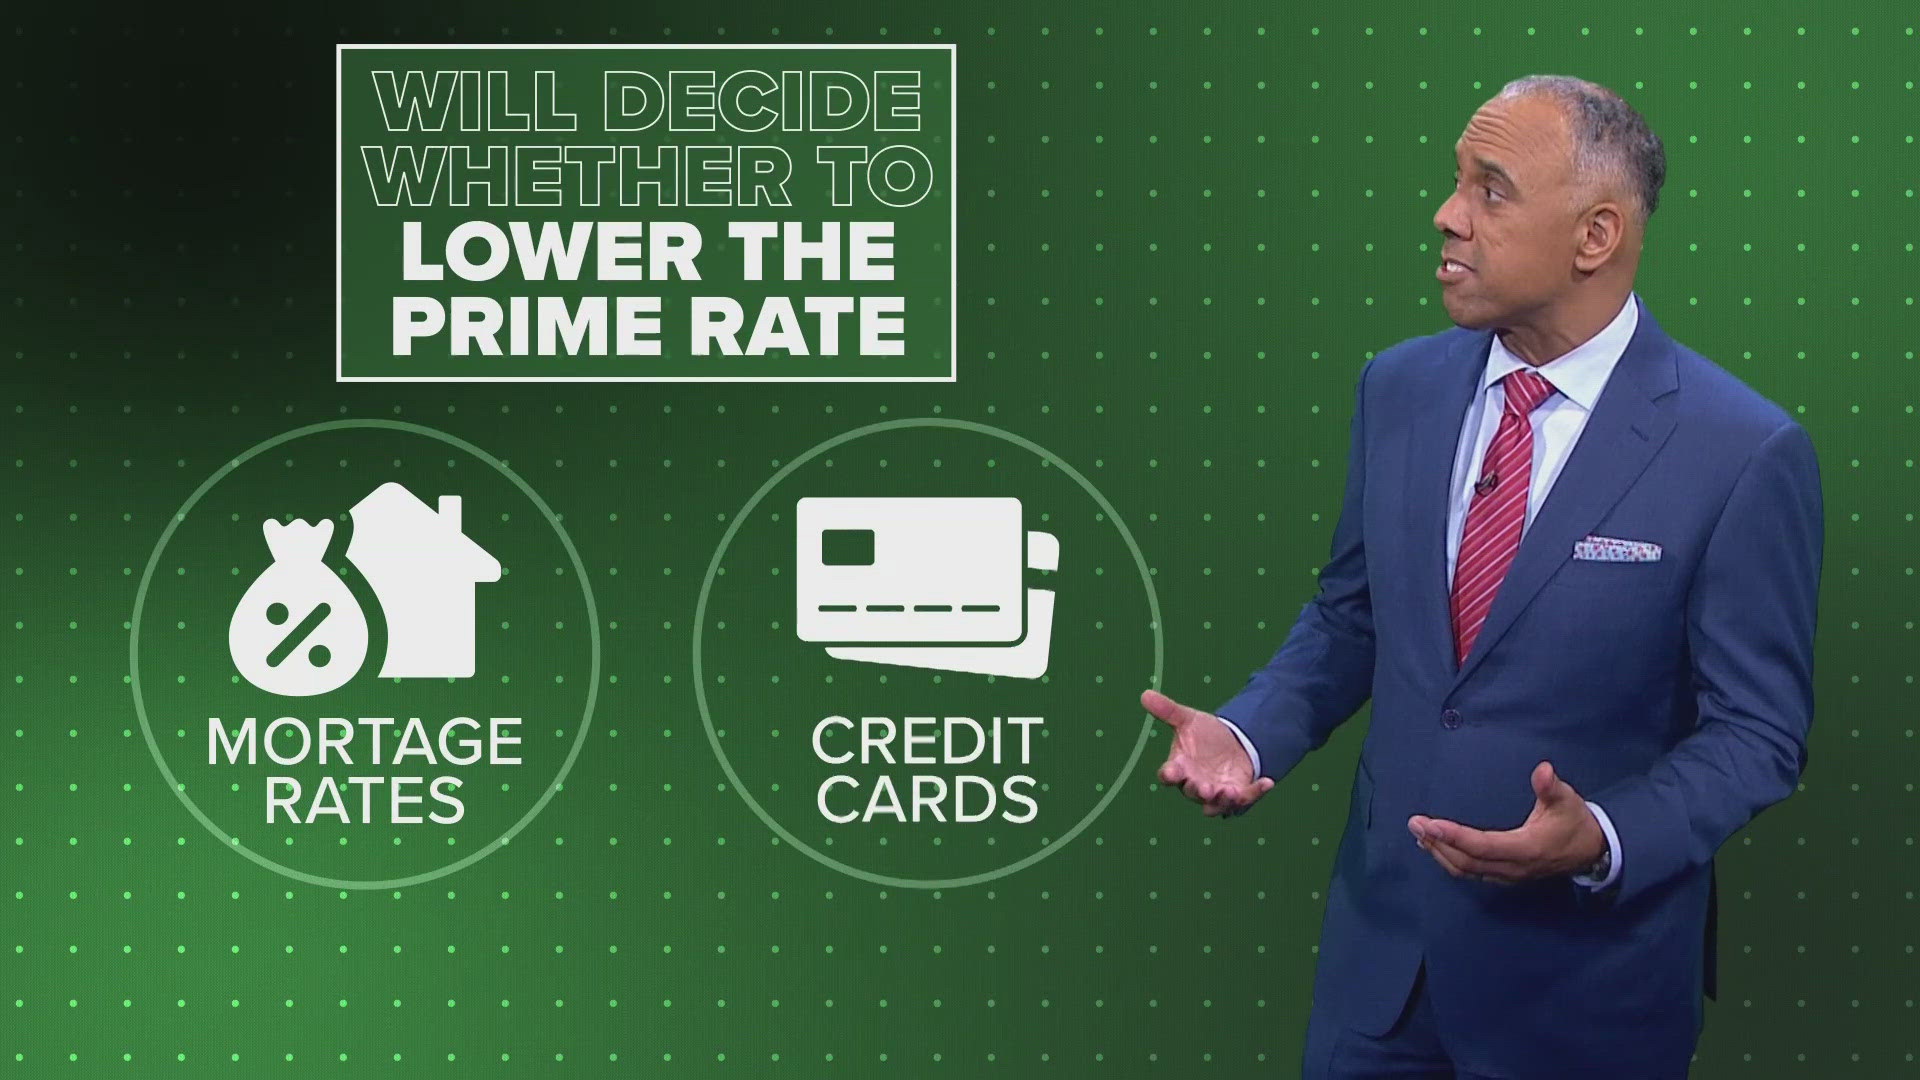 The rate affects everything from mortgage to credit cards.